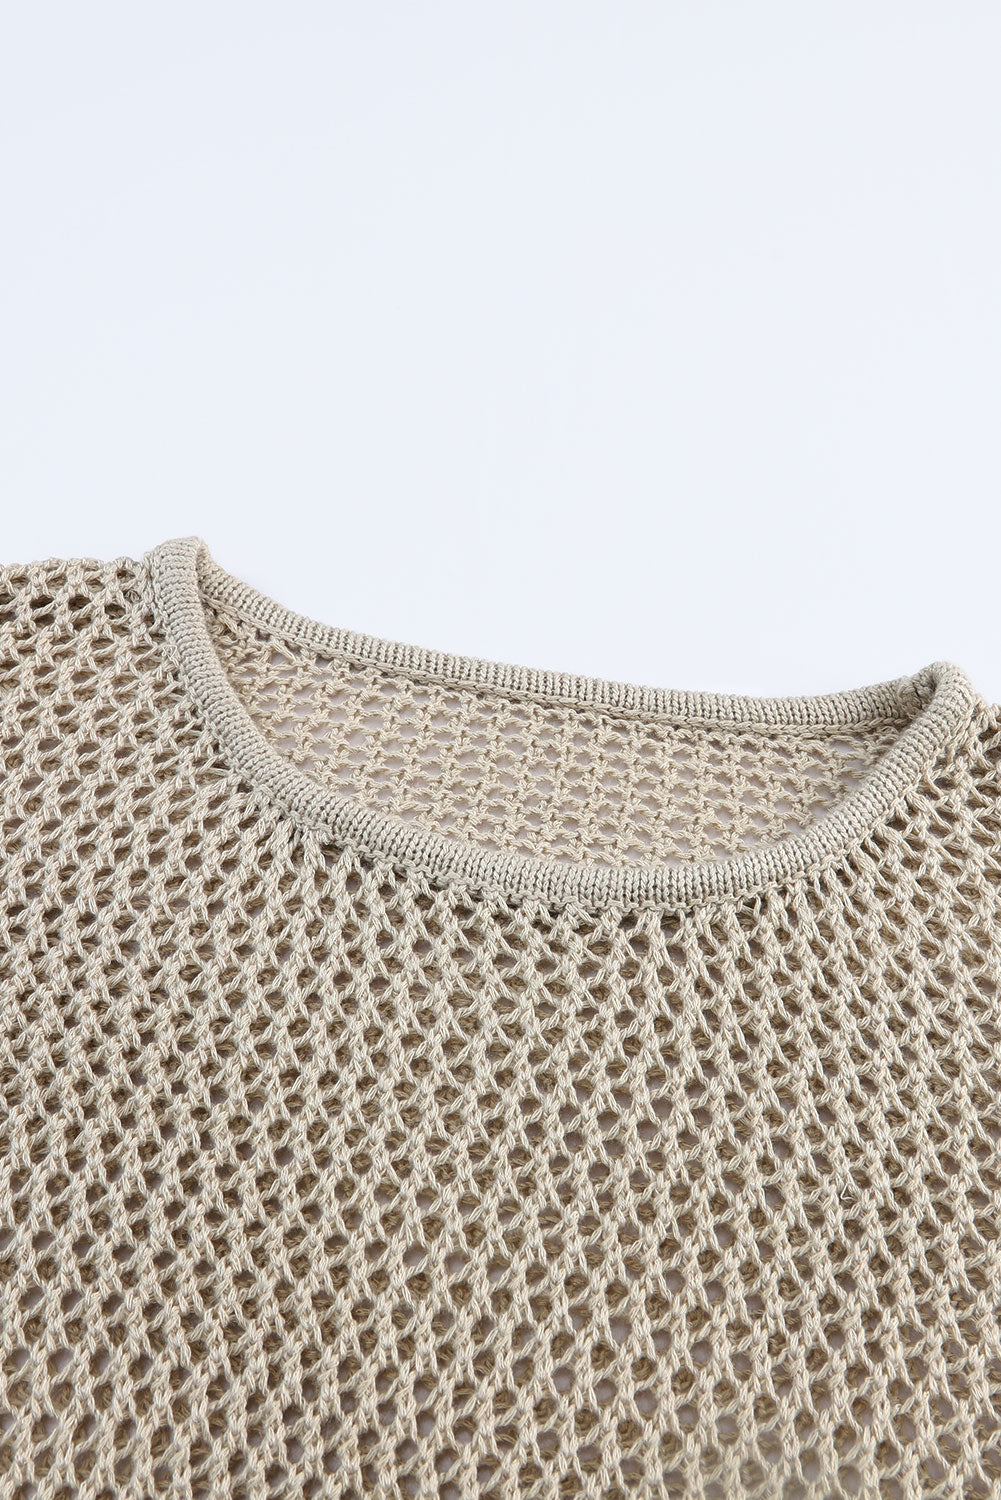 Khaki Hollow-out Knit Long Sleeve Top